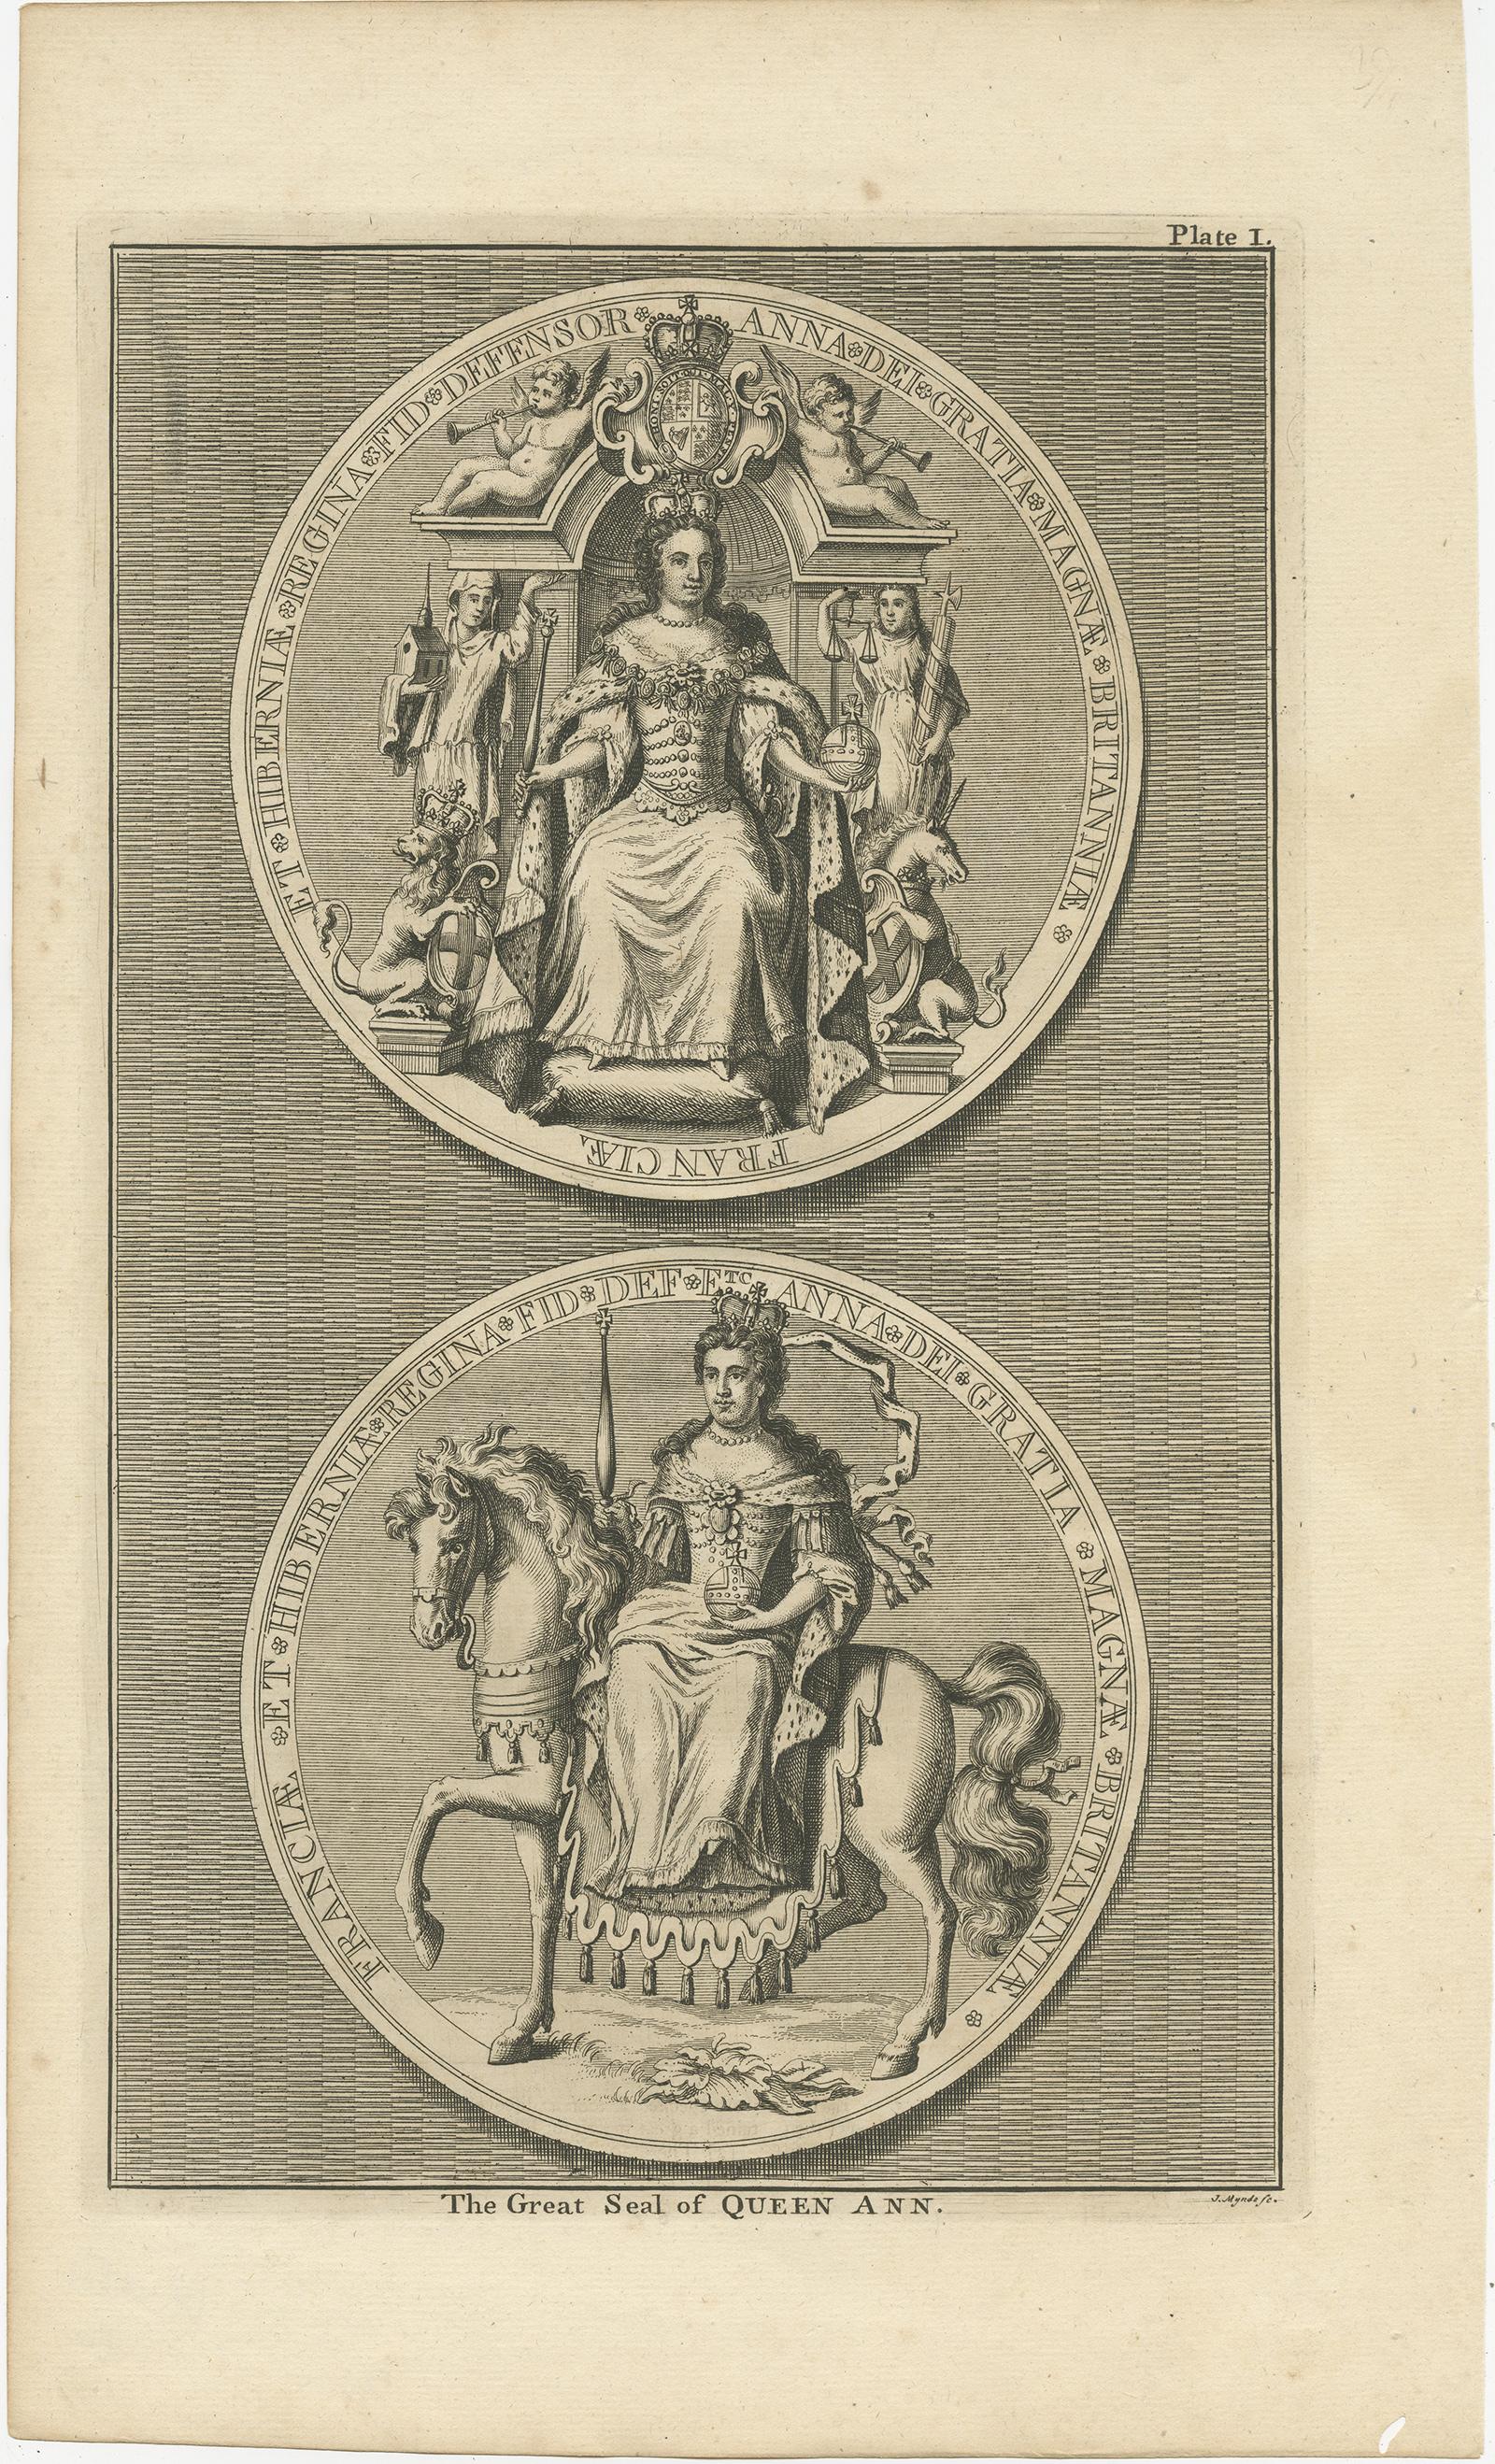 Set of four antique print of great seals including:

1) The Great Seal of Queen Ann (Queen Anne). 
2) The Great Seal of Queen Ann after the Union with Scotland. 
3) The Great Seal of King William III.
4) The Great Seal of King George